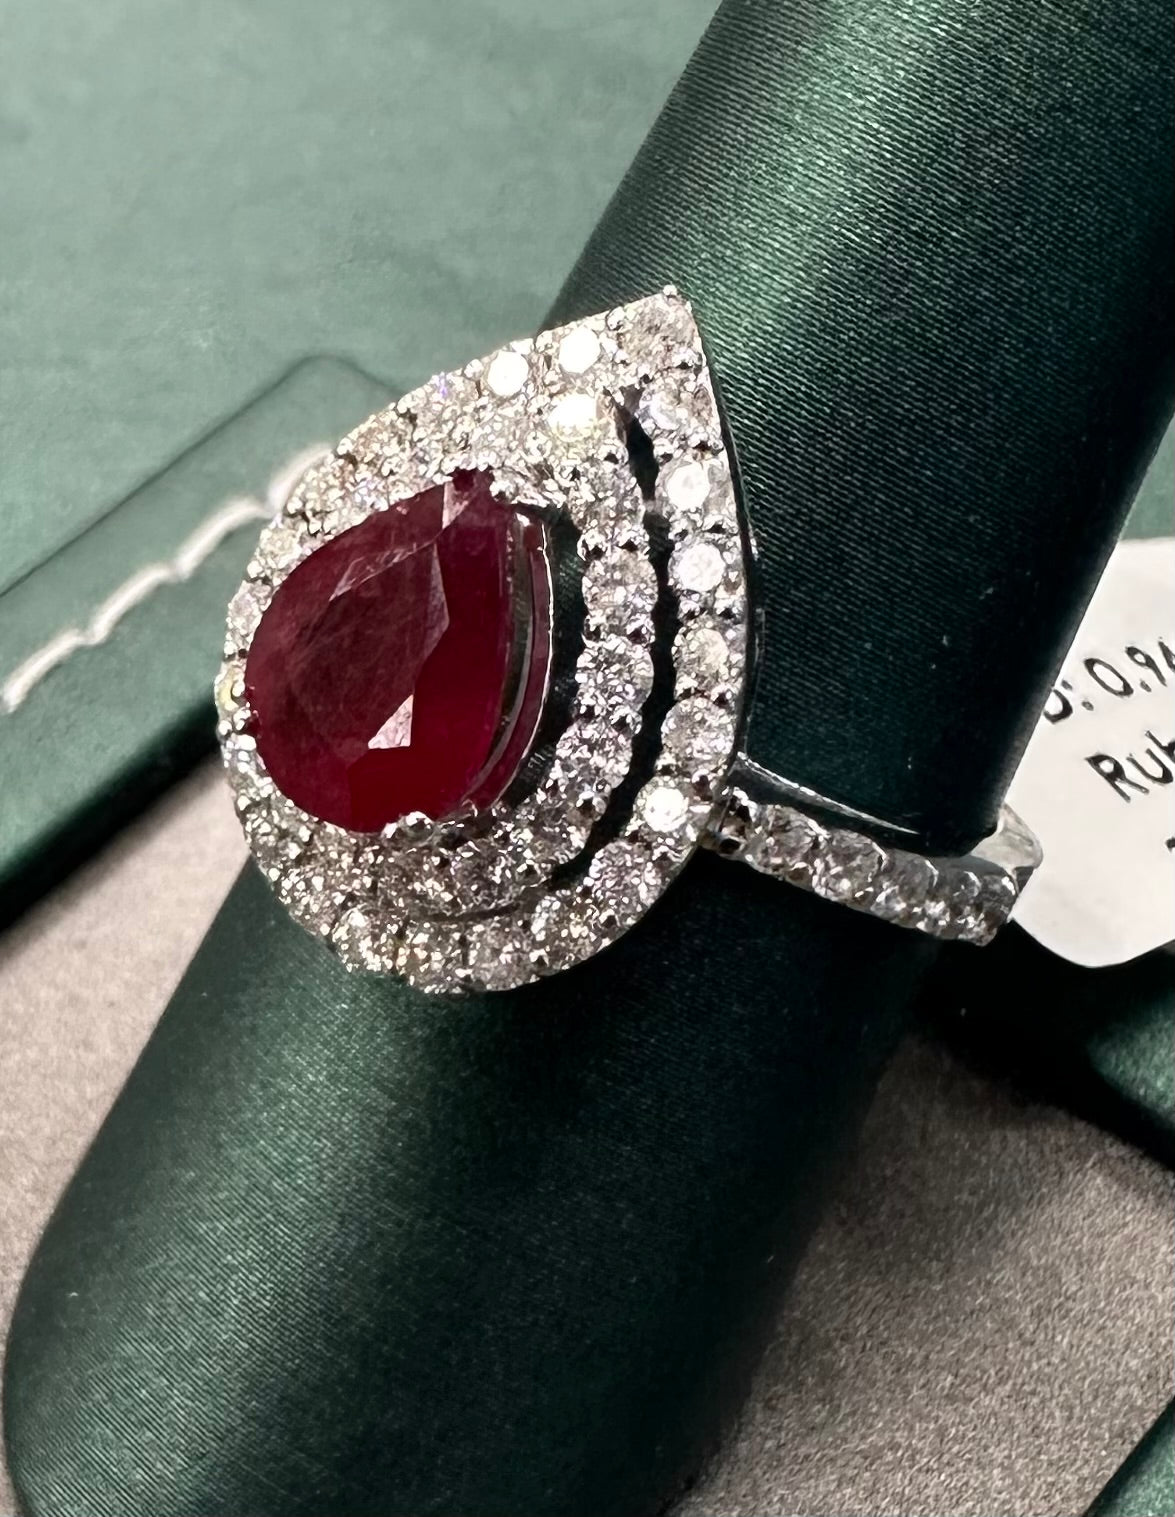 The ruby tearing ring